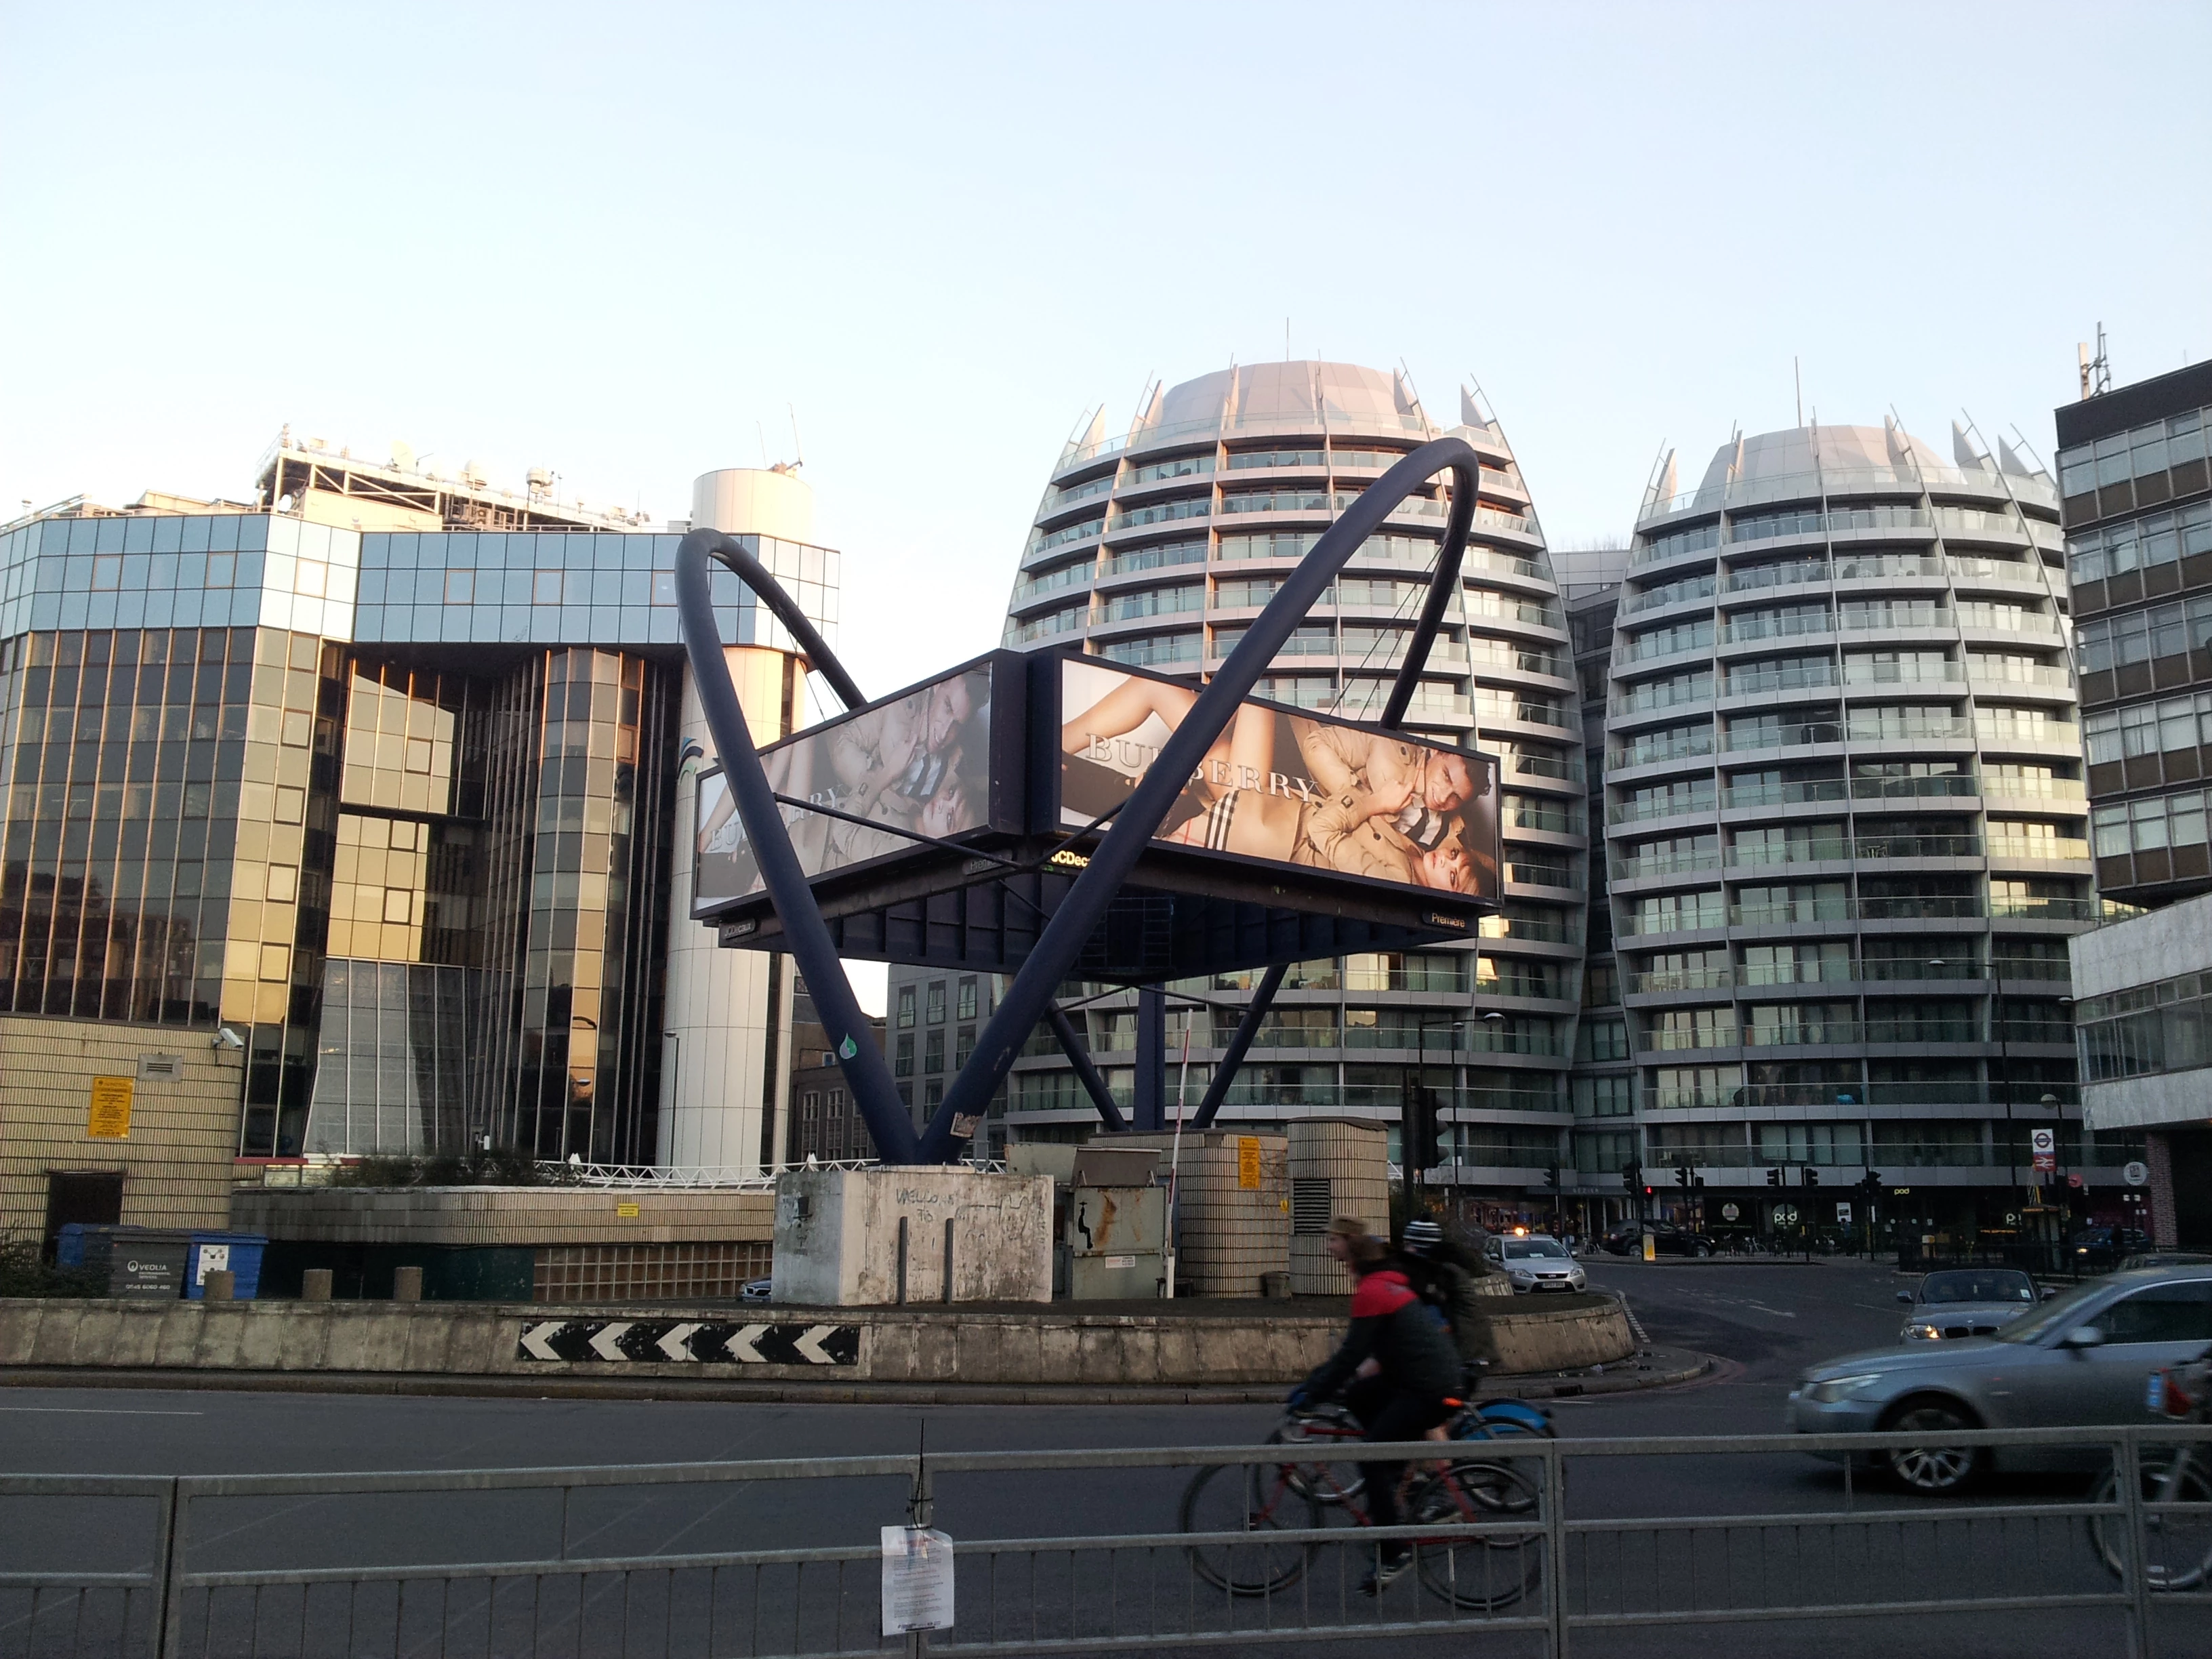 Silicon Roundabout in East London.